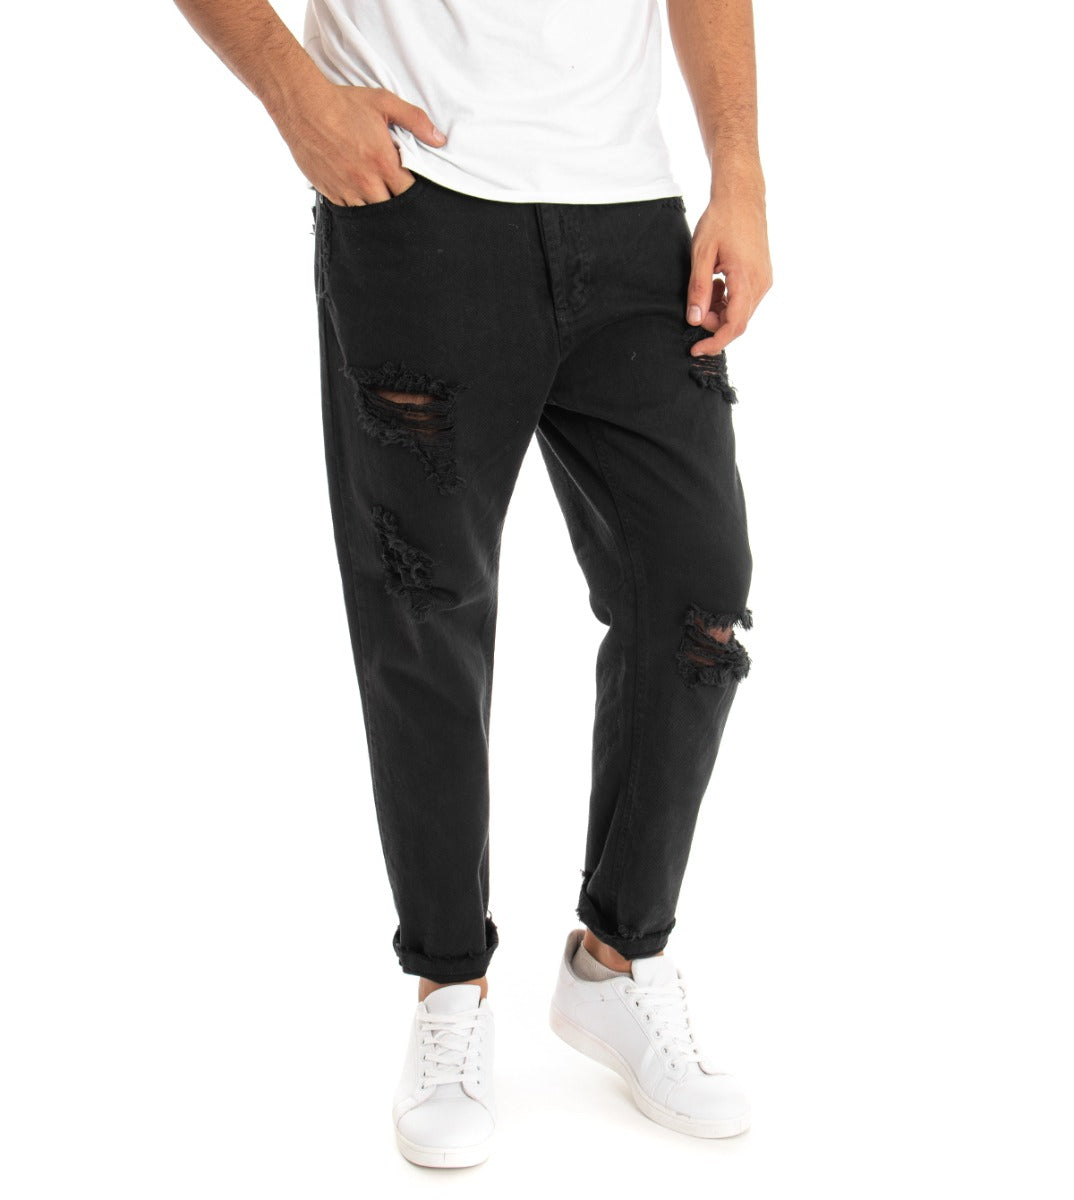 Men's Loose Fit Black Jeans Trousers With Rips Five Casual Pockets GIOSAL-P3278A